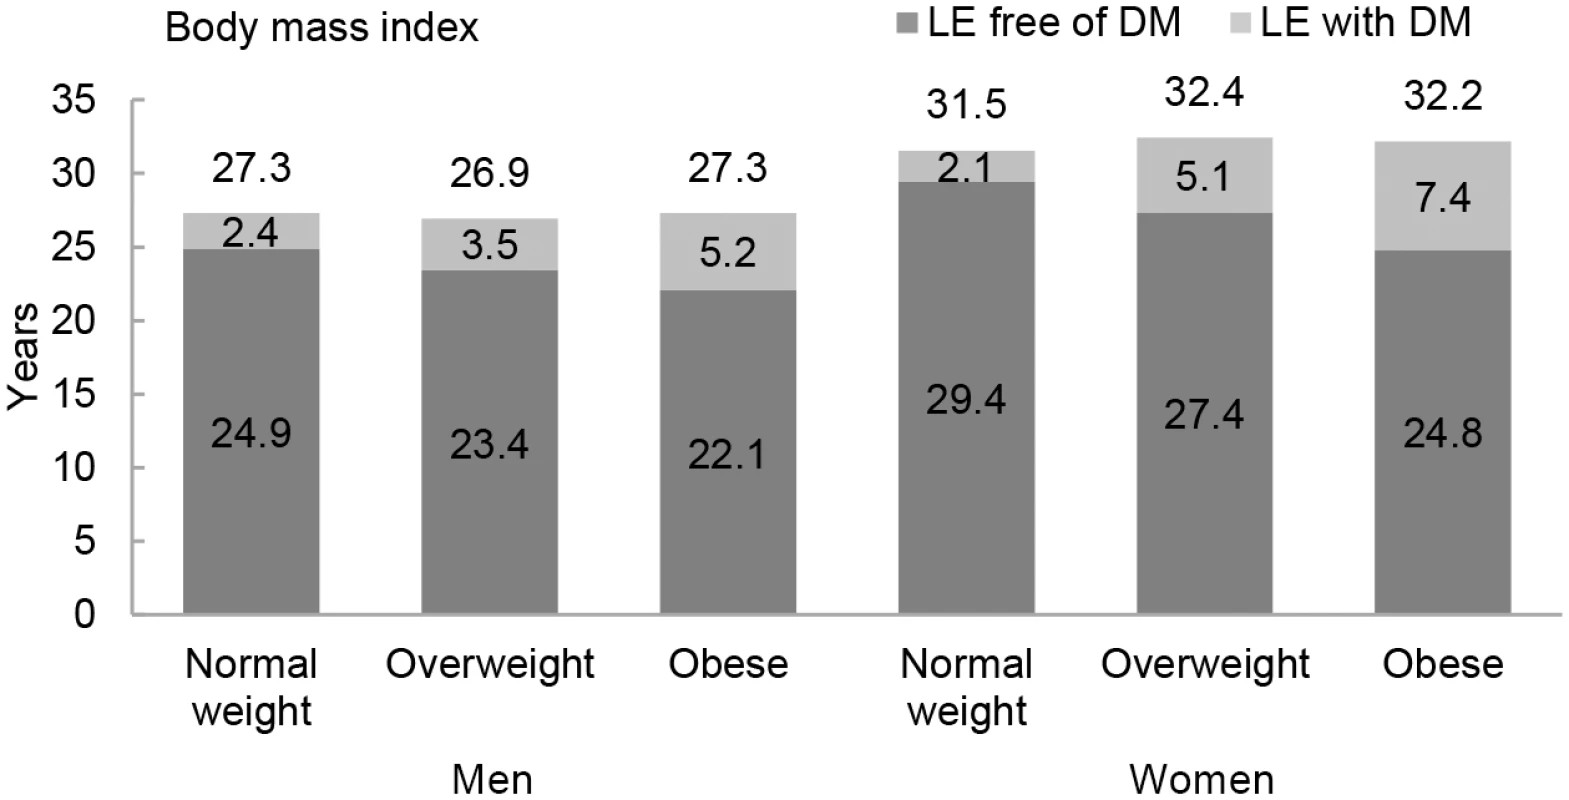 Life expectancy with and without diabetes at age 55 y for different weight categories.